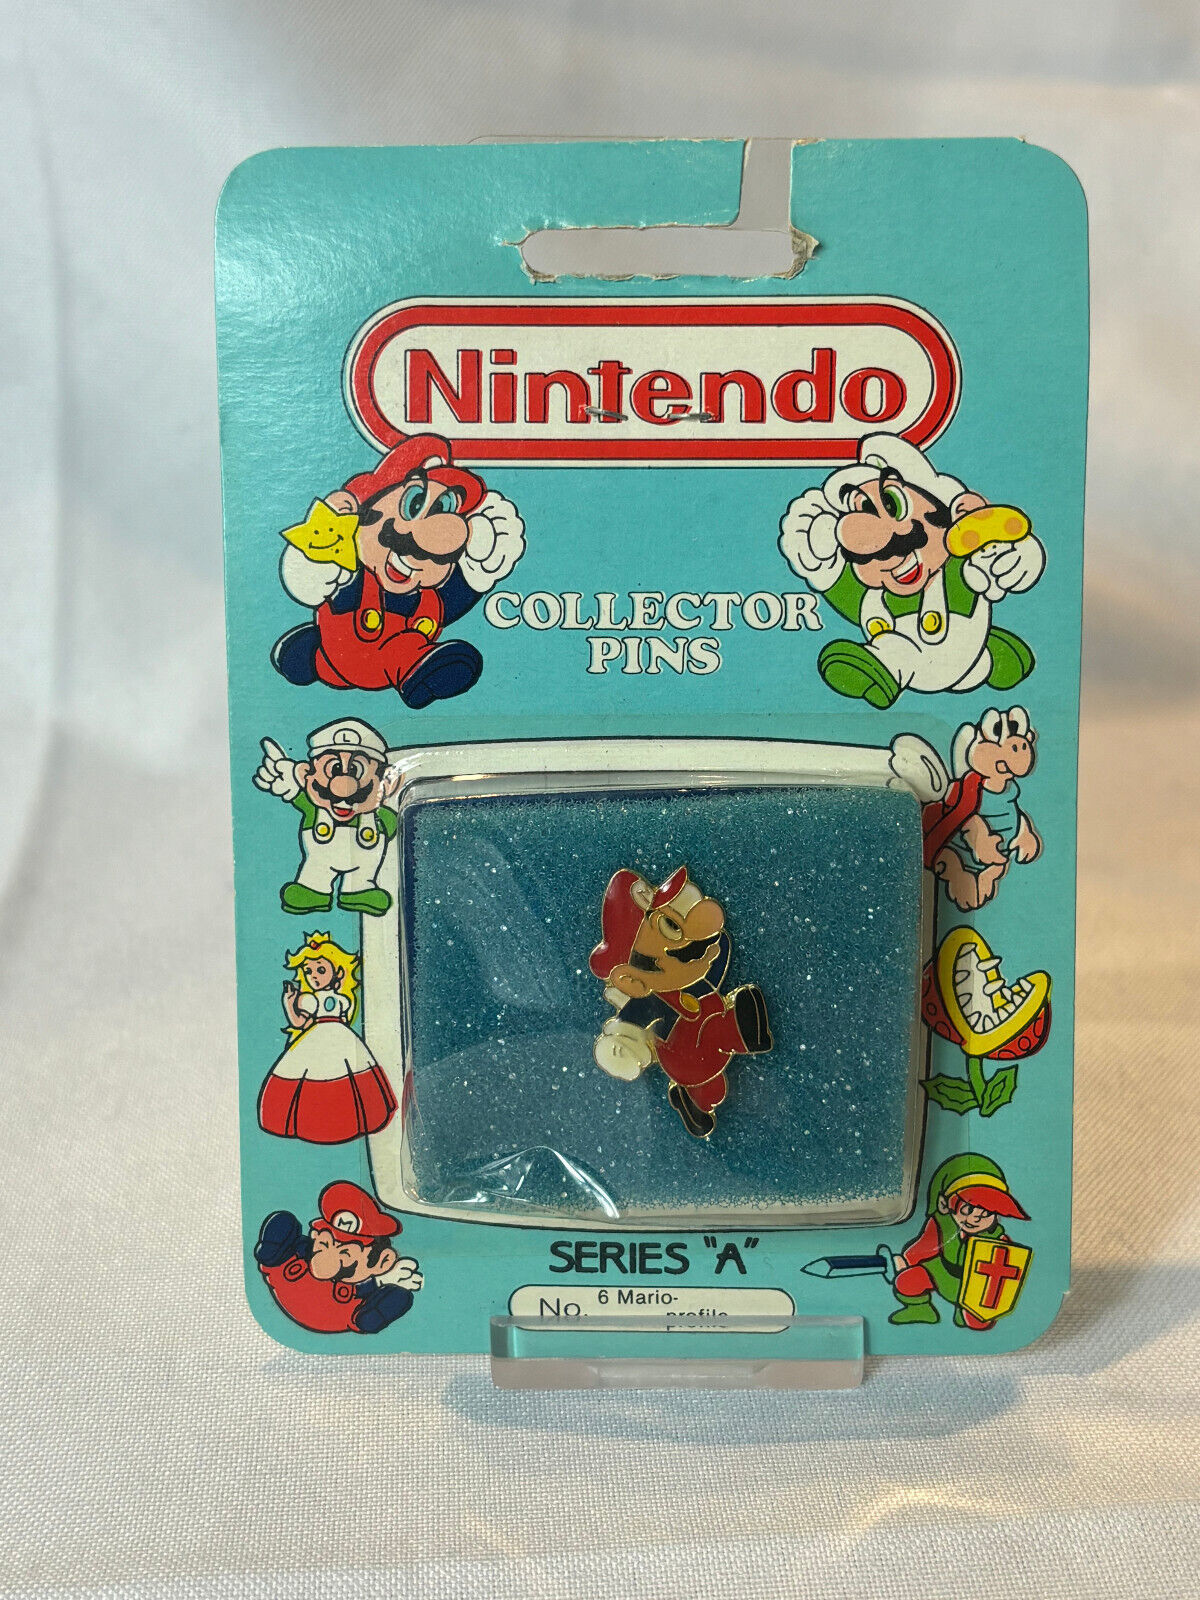 1989 Nintendo Collector Pin Series "A" No 6 MARIO PROFILE Sealed Blister Pack - £31.34 GBP